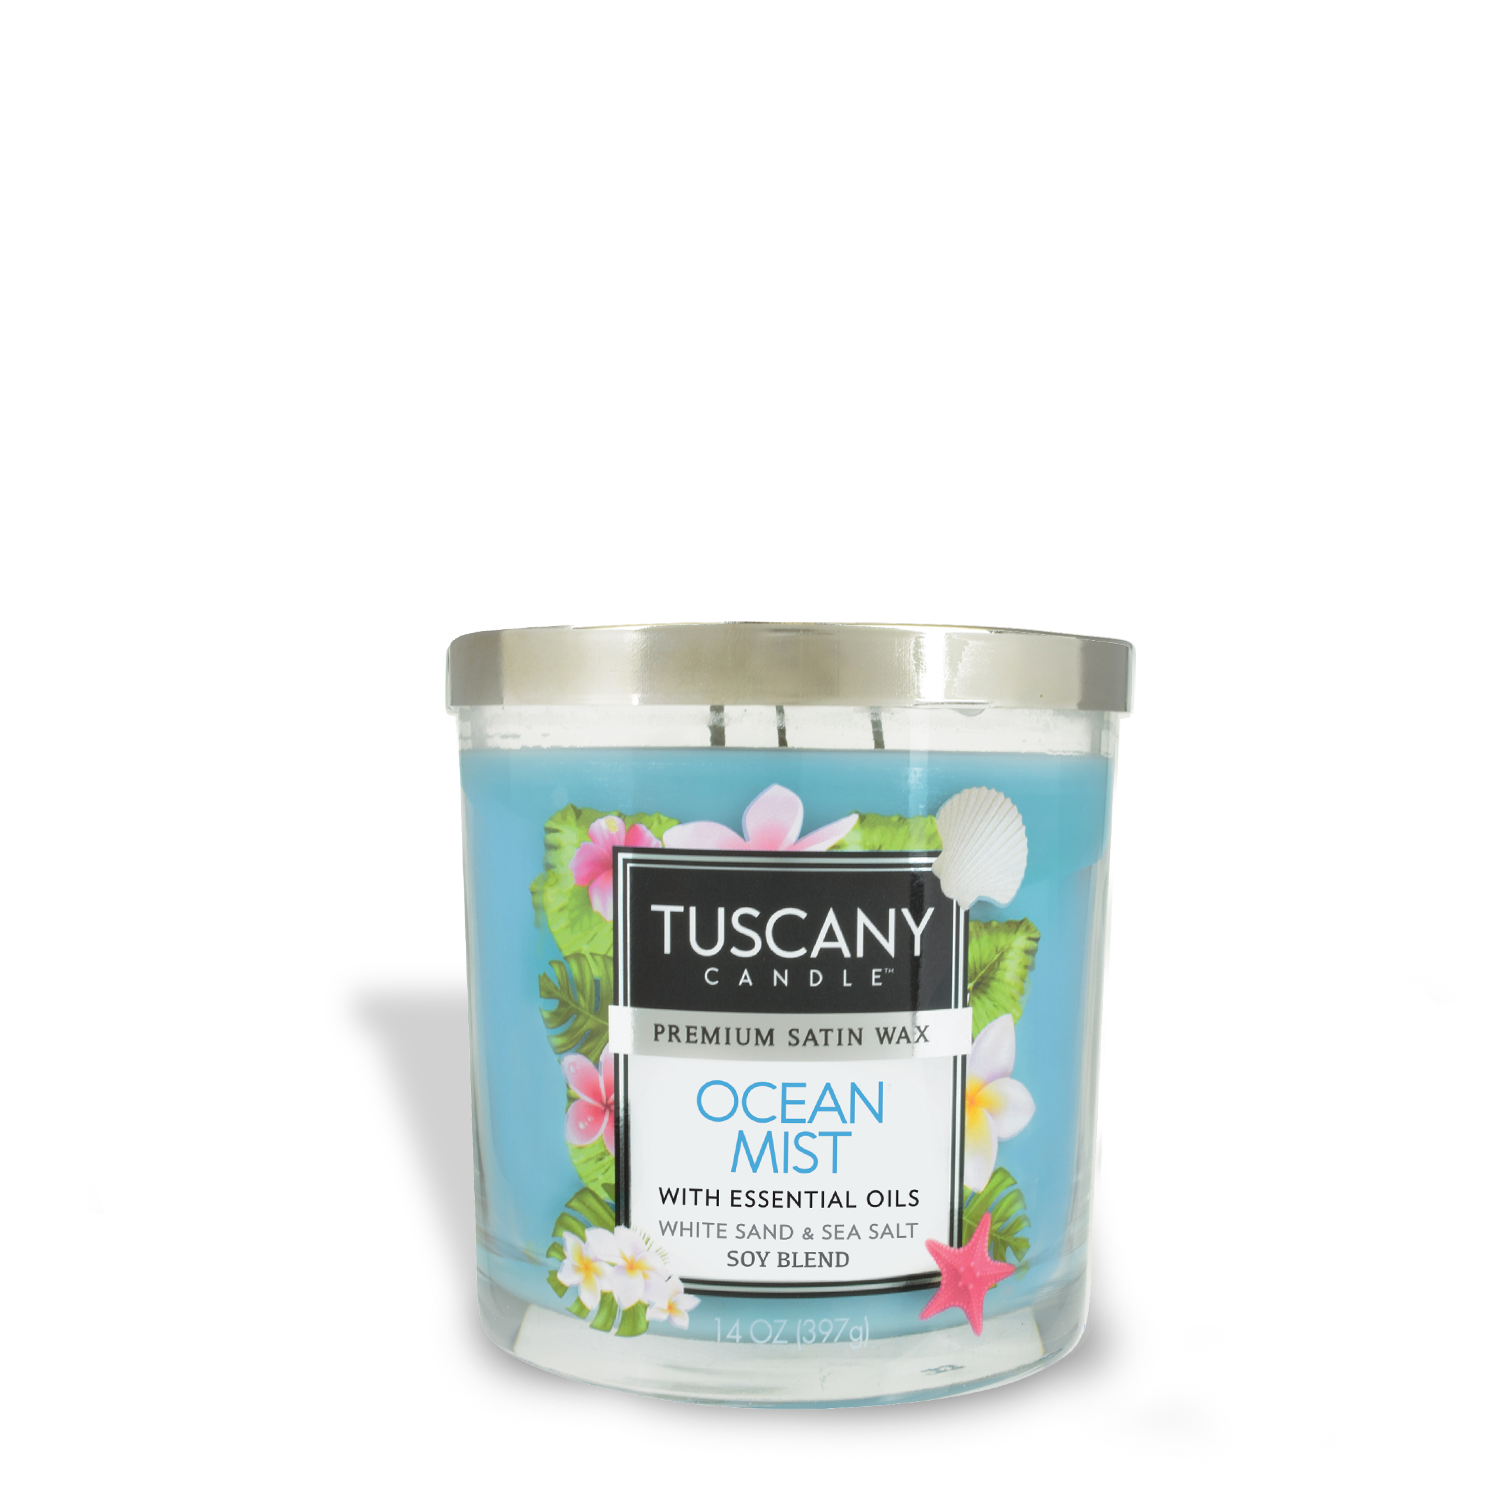 Tuscany Candle Ocean Mist Long-Lasting Scented Jar Candle (14 oz) with a clean burn and captivating ocean mist fragrance.